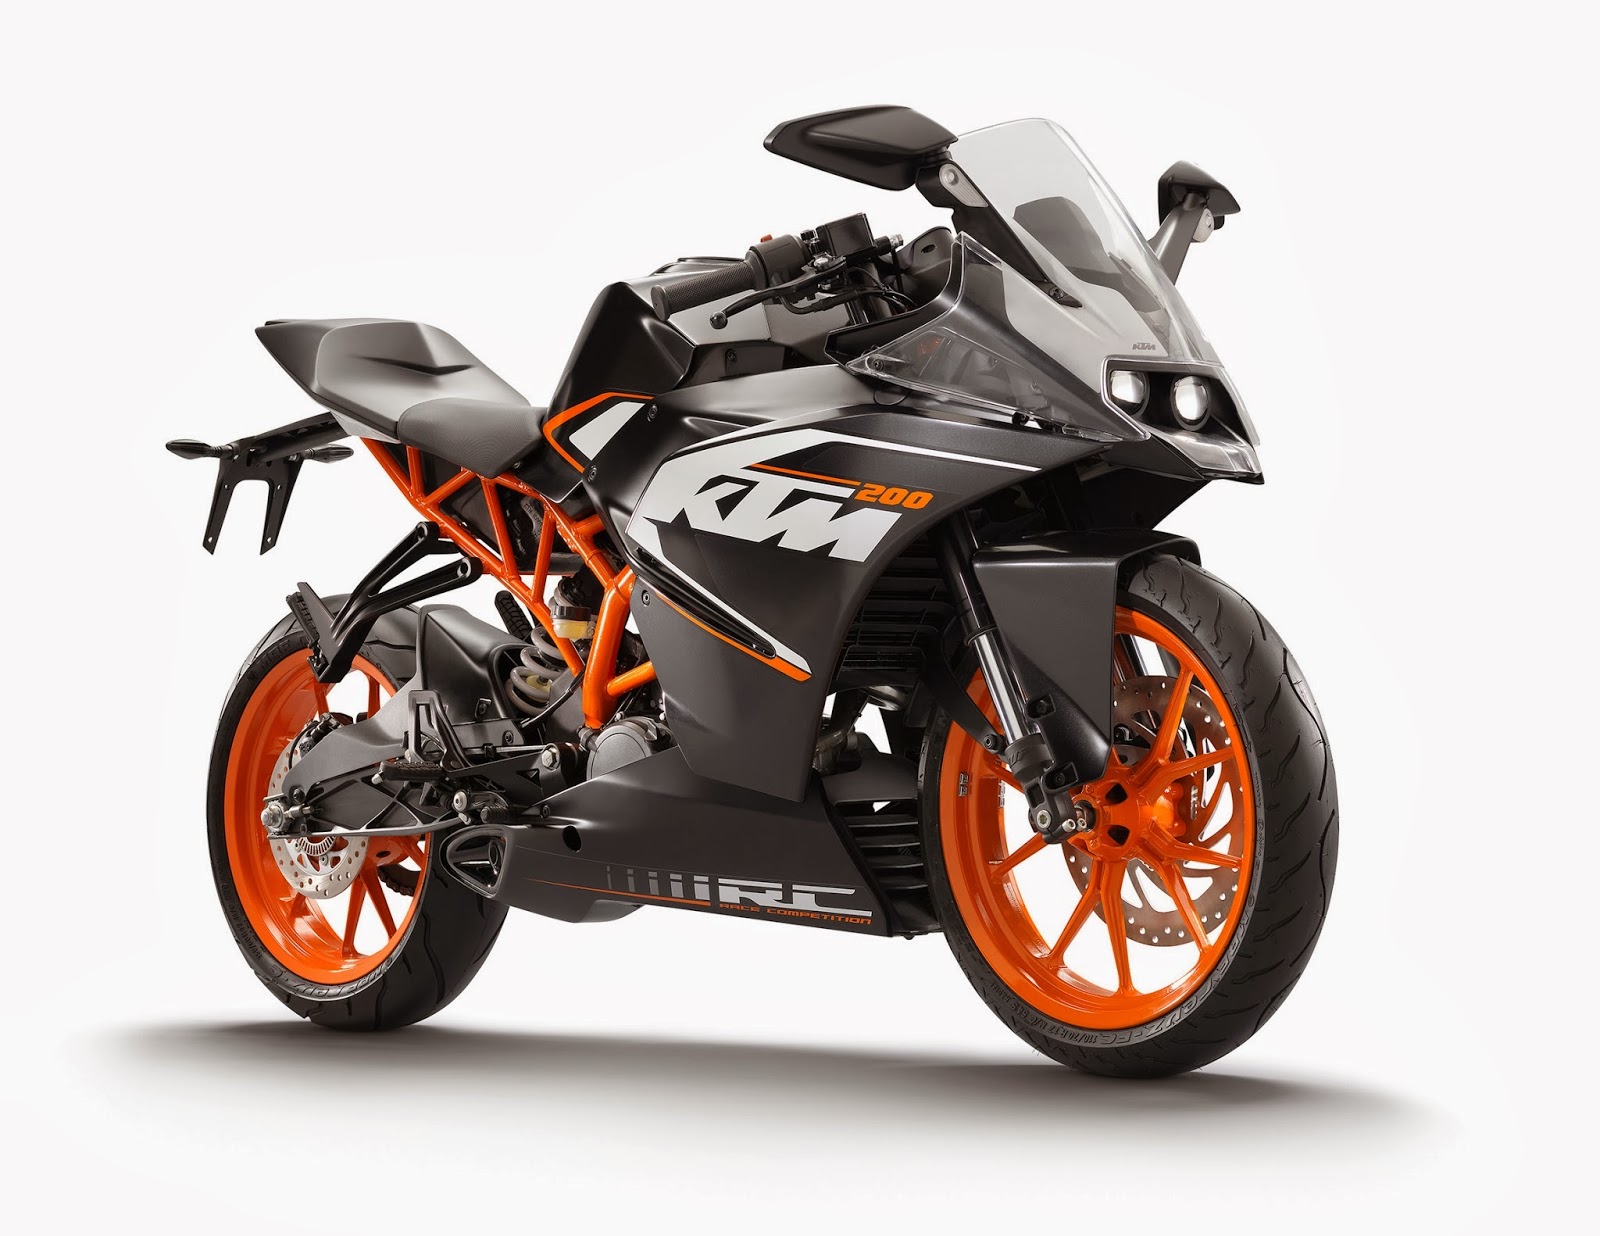 Ktm India To Launch 4 New Bikes Rc200 Rc390 390 Adventure 1190